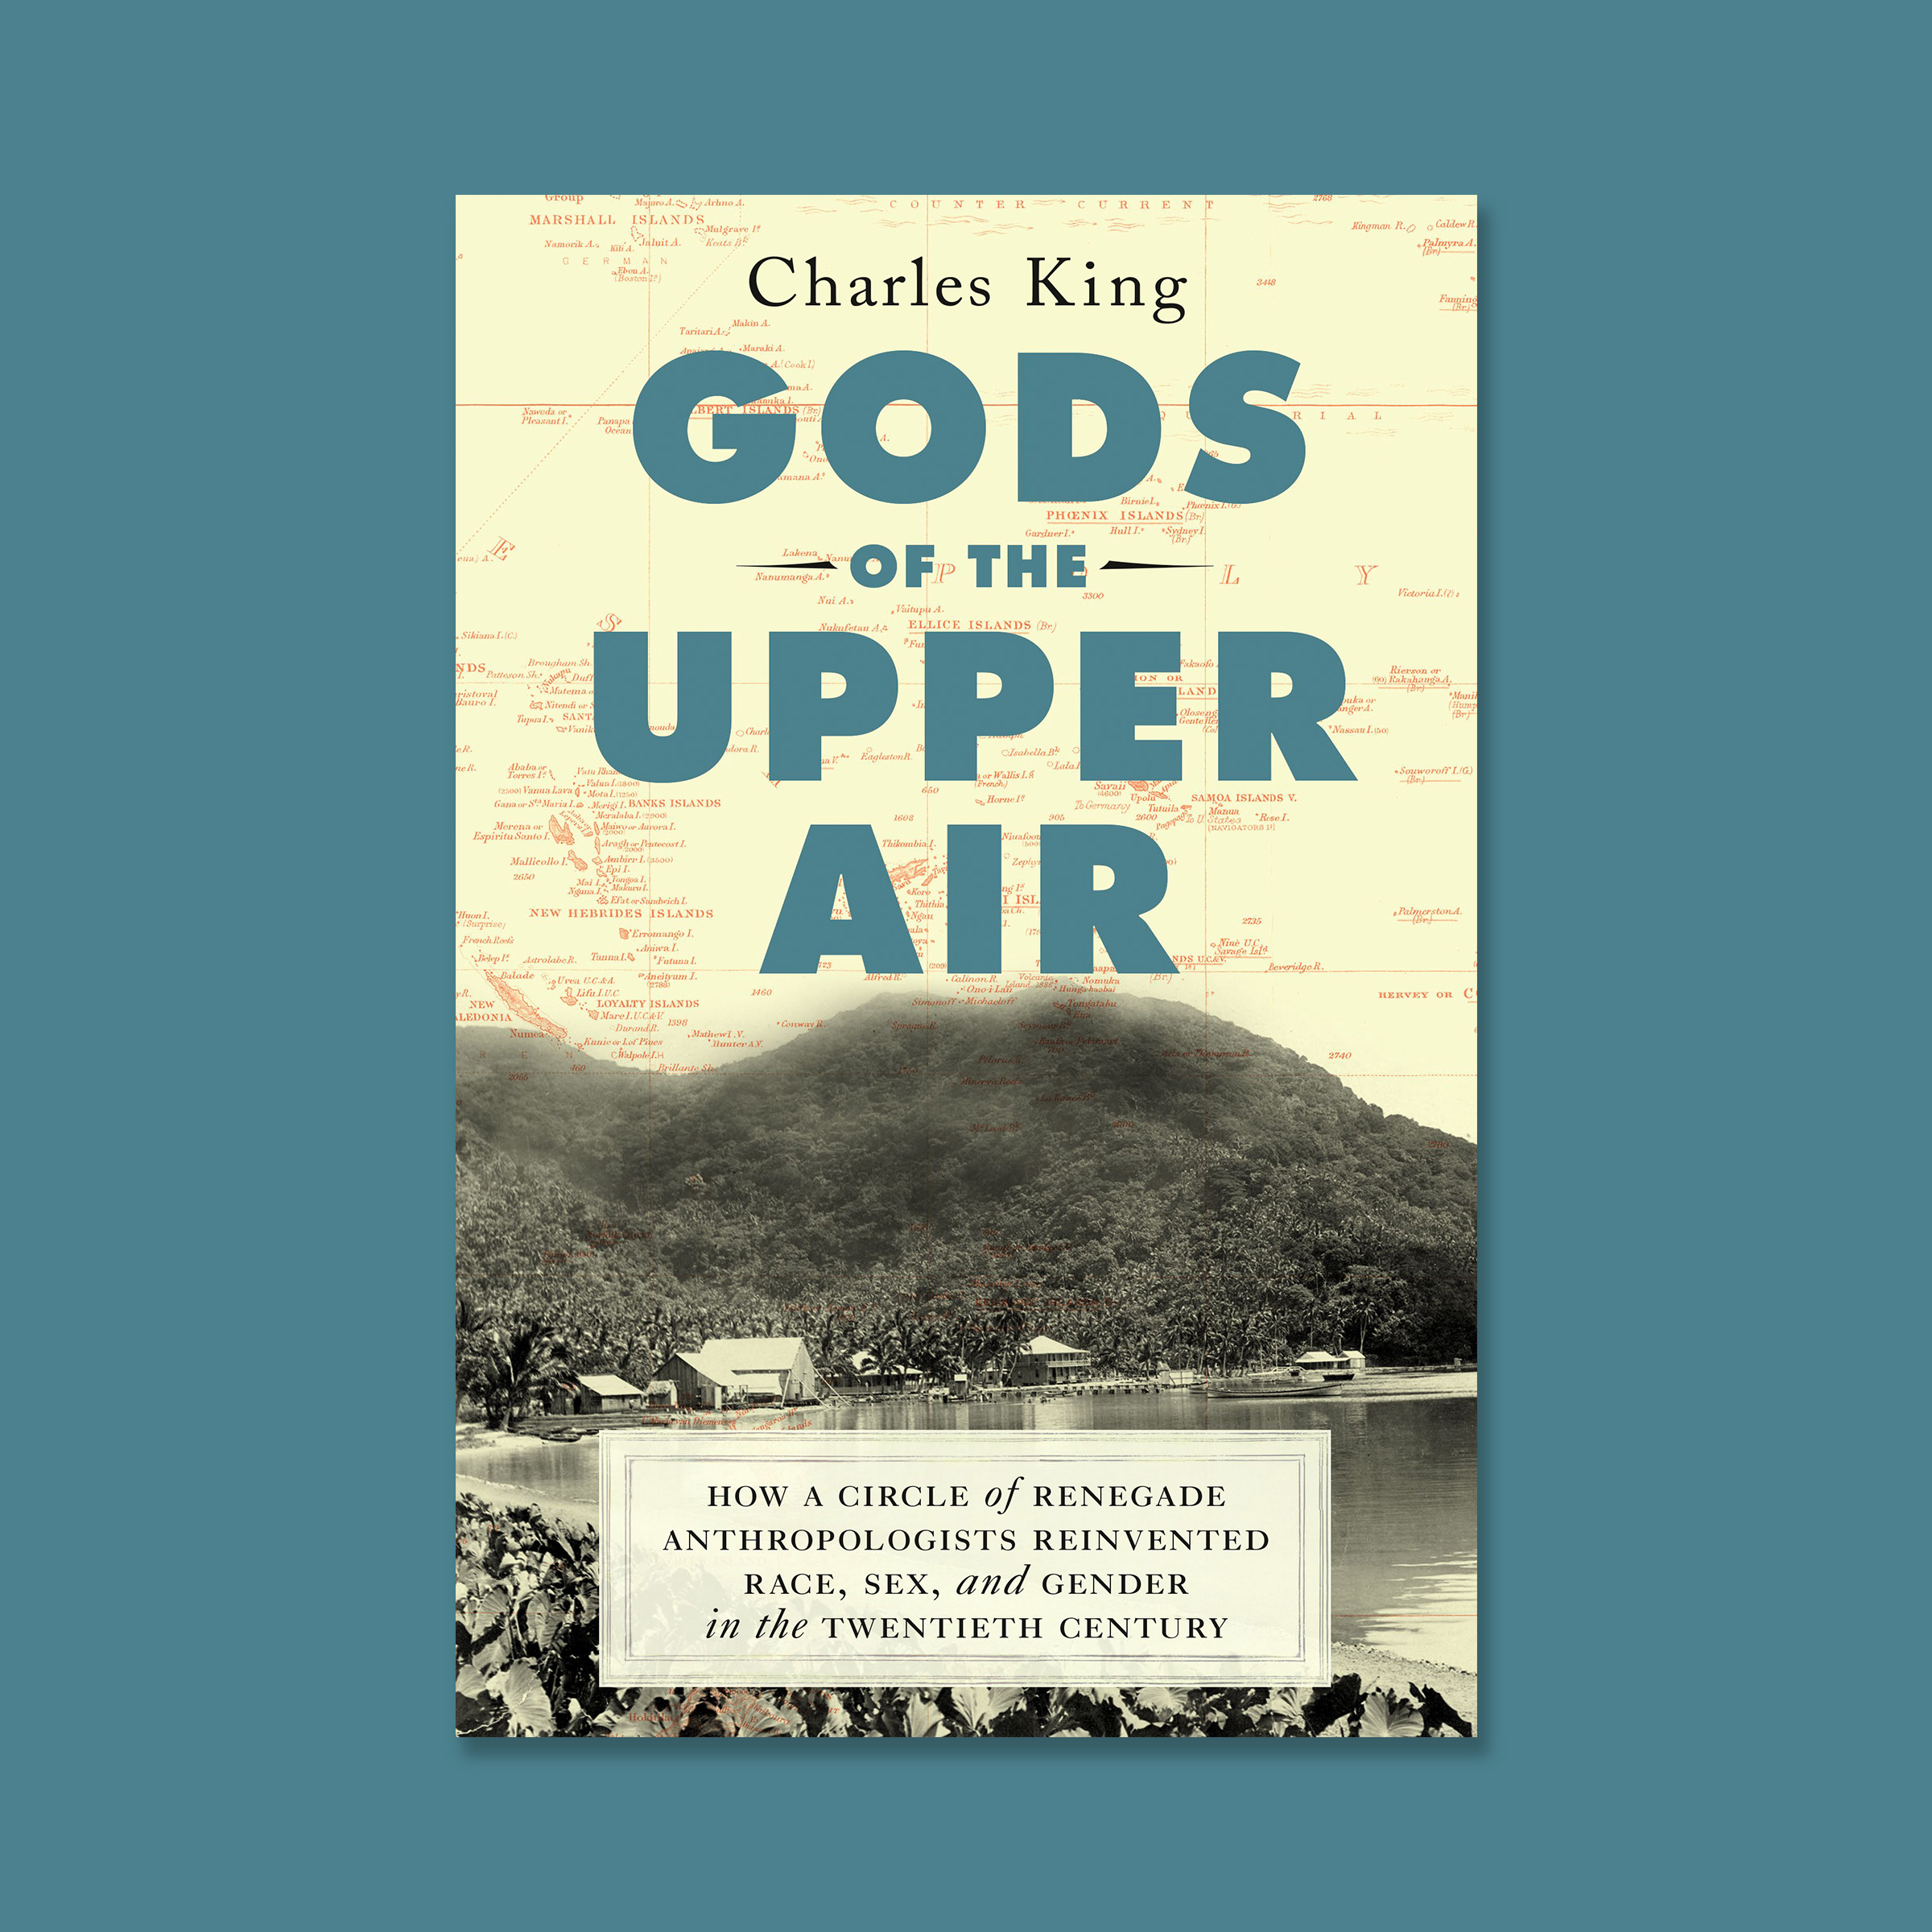 King, a professor at Georgetown, is the author of <em>Gods of the Upper Air: How a Circle of Renegade Anthropologists Reinvented Race, Sex, and Gender in the Twentieth Century.</em>